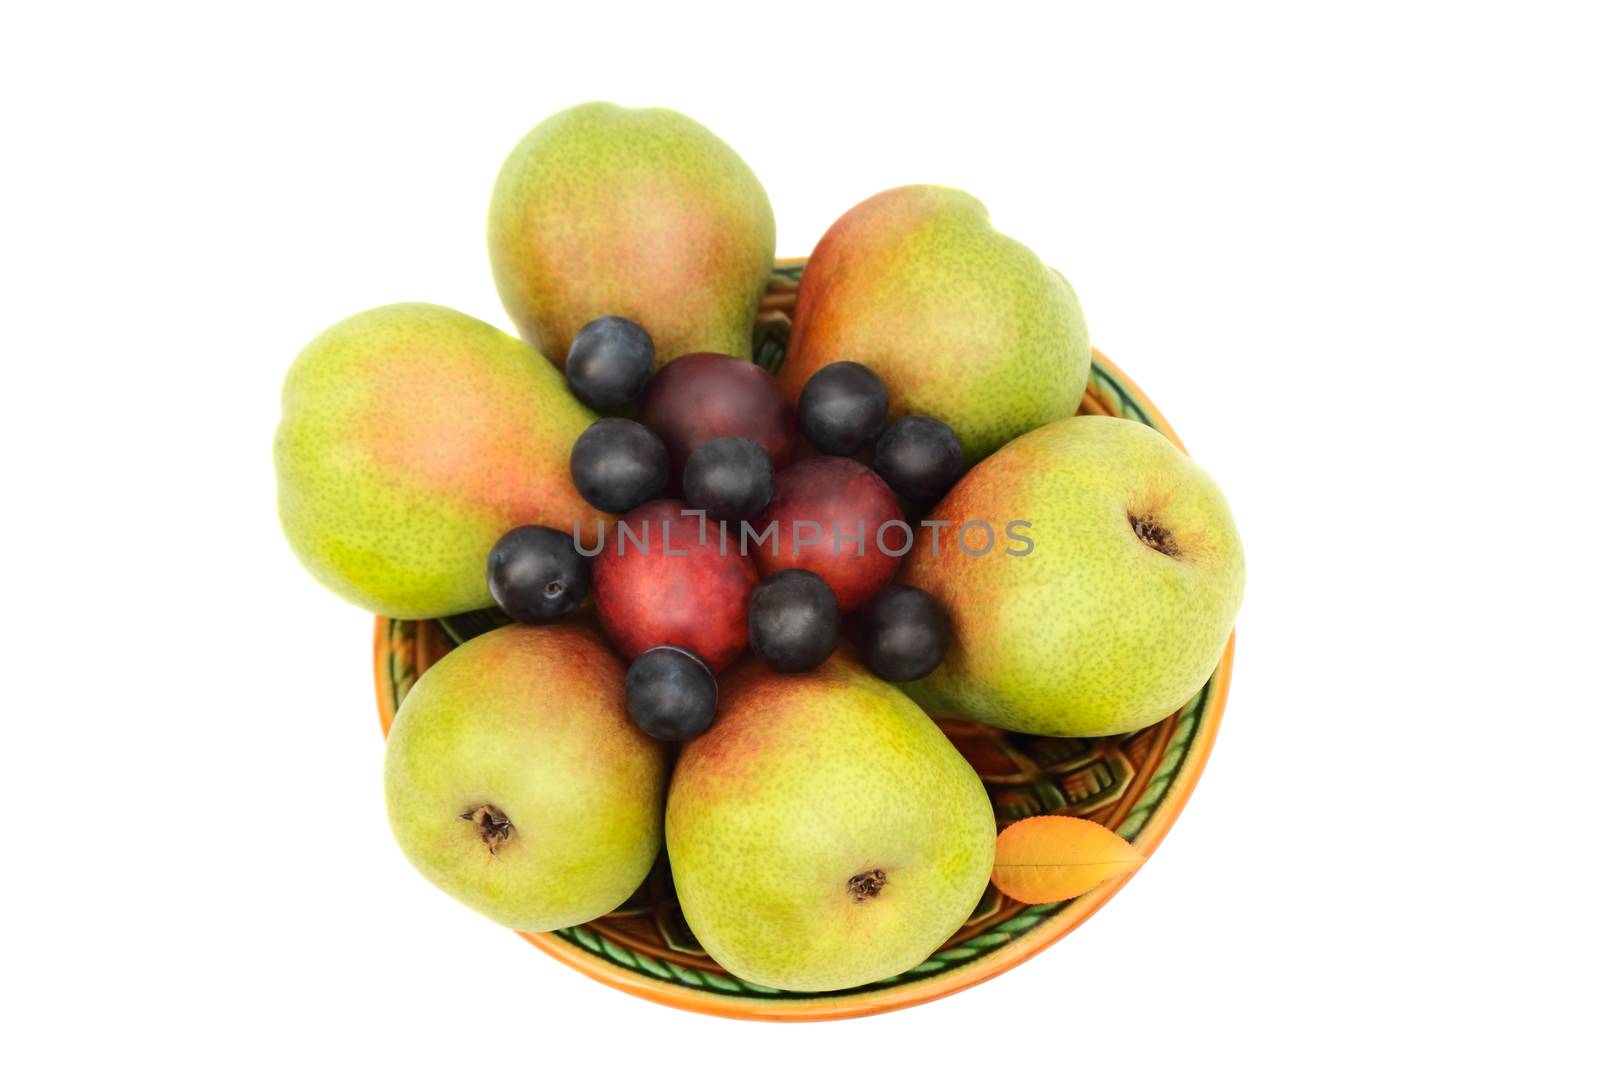 Large ripe pears, plums on a ceramic plate. Presented on a white background.